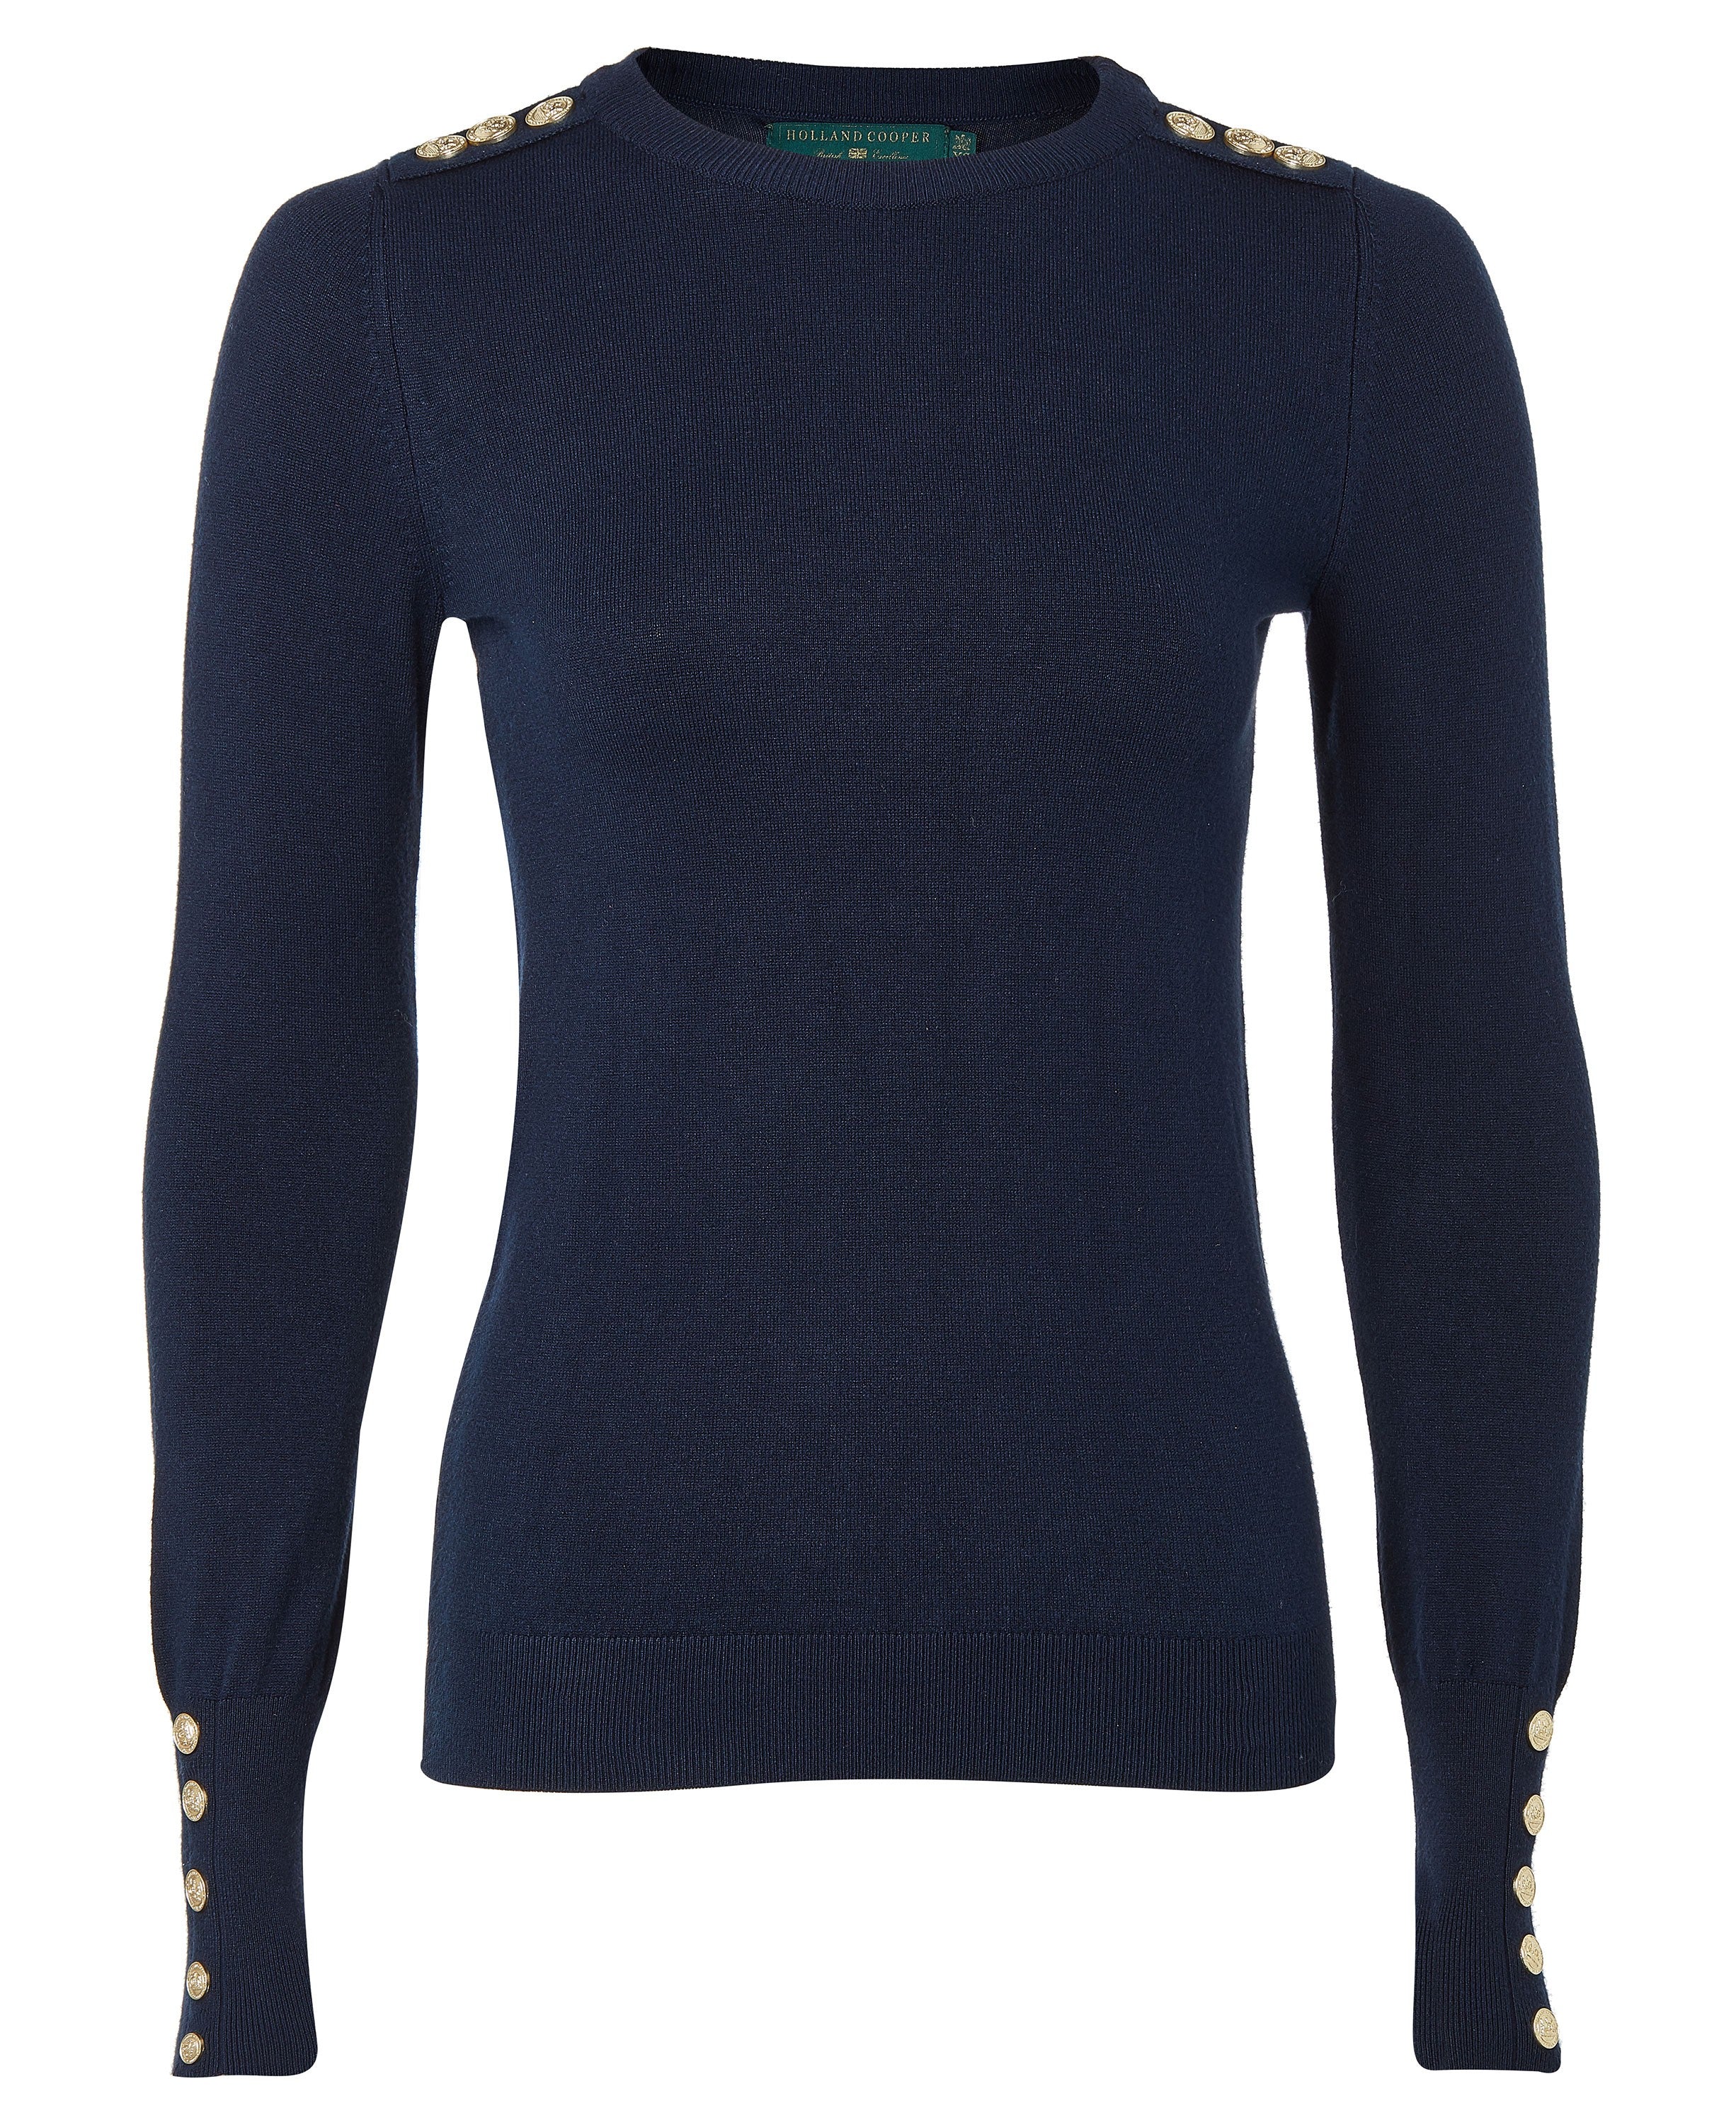 Buttoned Knit Crew Neck - Ink Navy